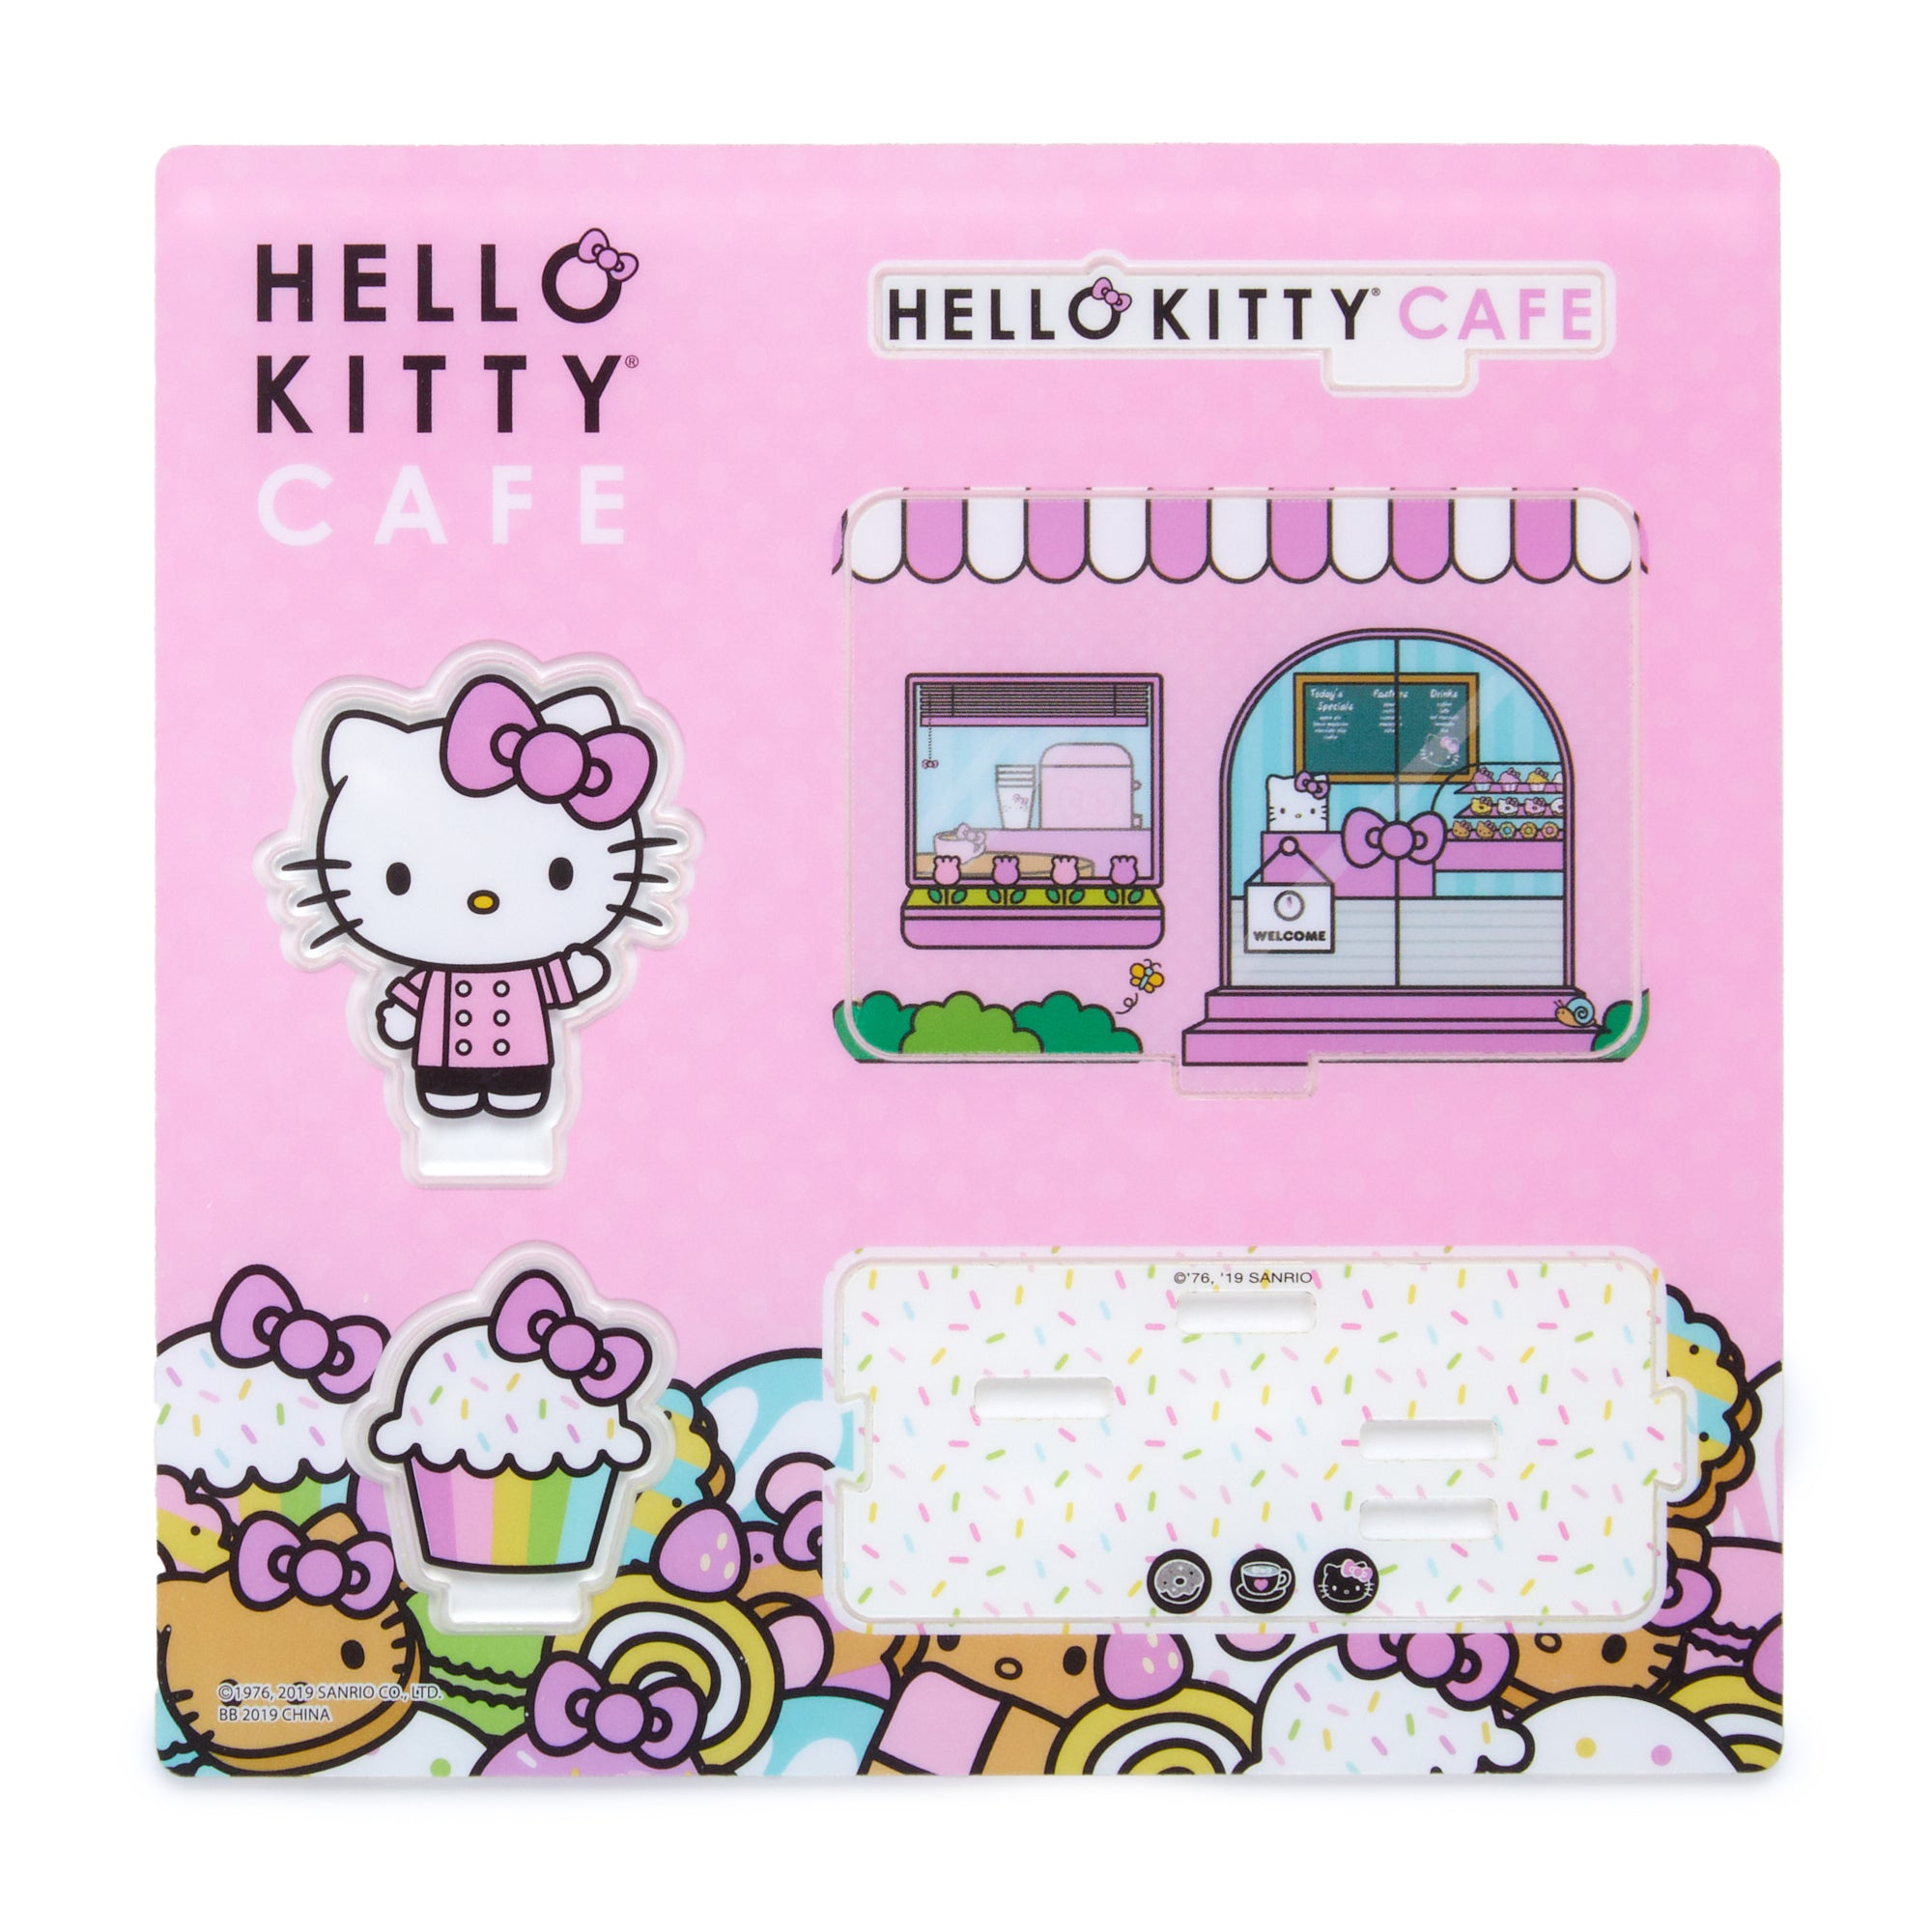 Our Vegas Jackpot - Hello Kitty Cafe and Game Nest